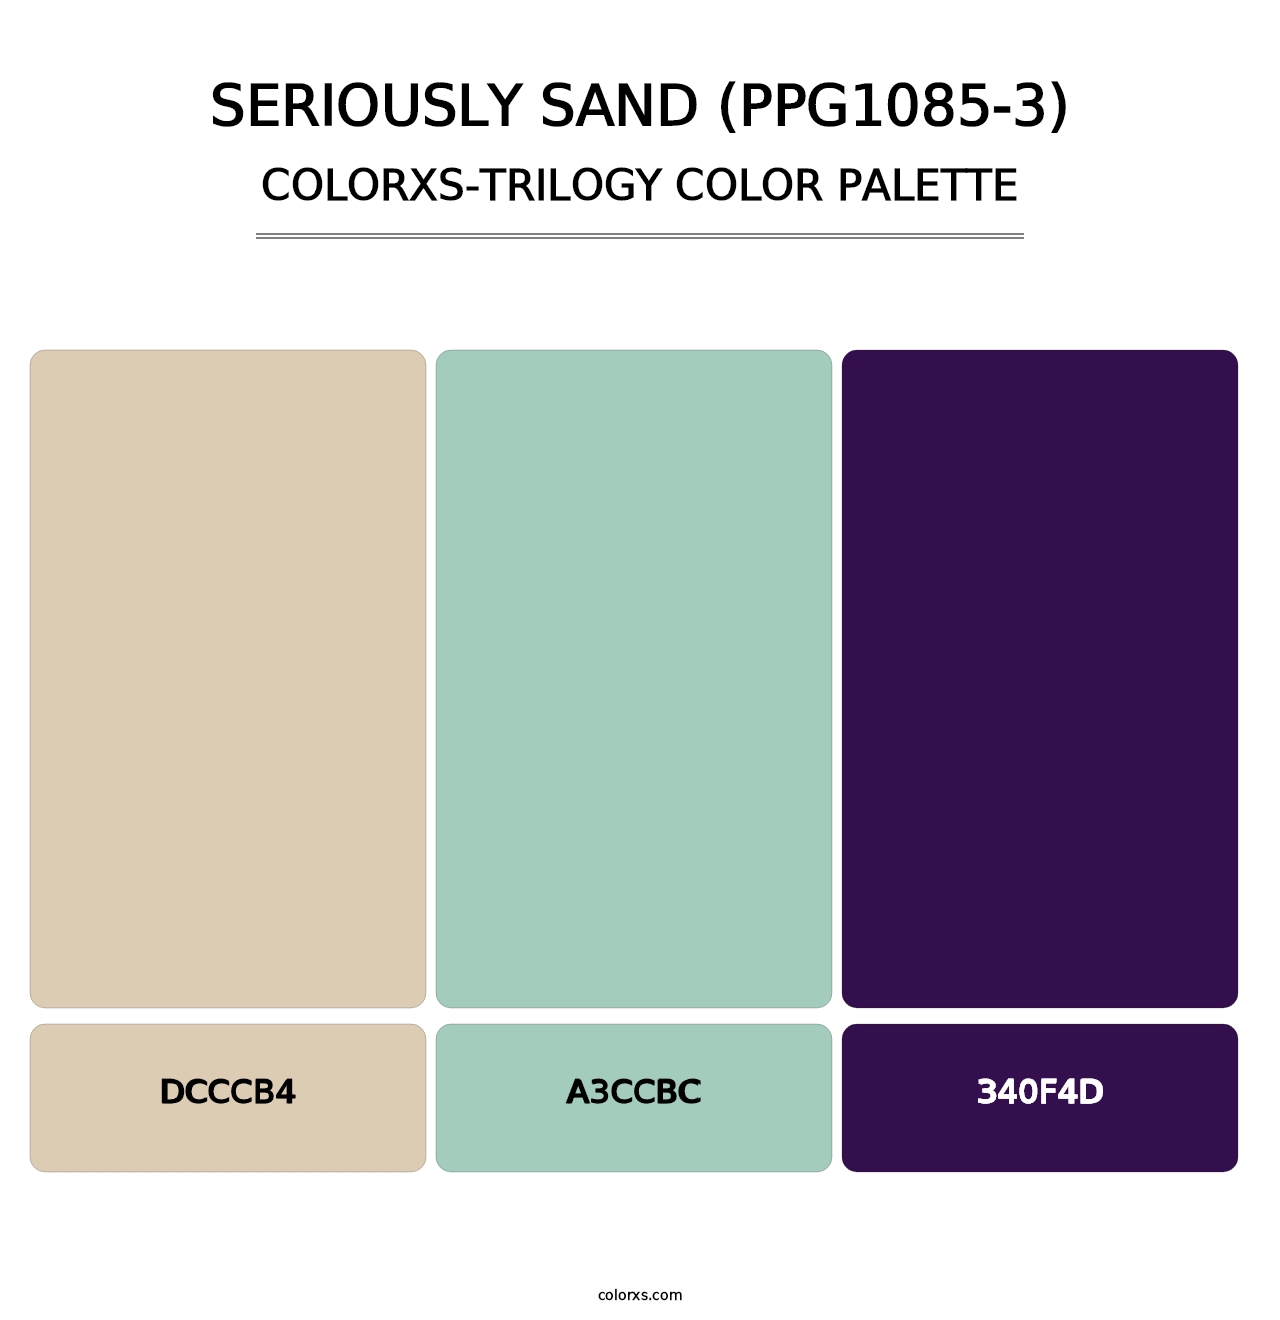 Seriously Sand (PPG1085-3) - Colorxs Trilogy Palette